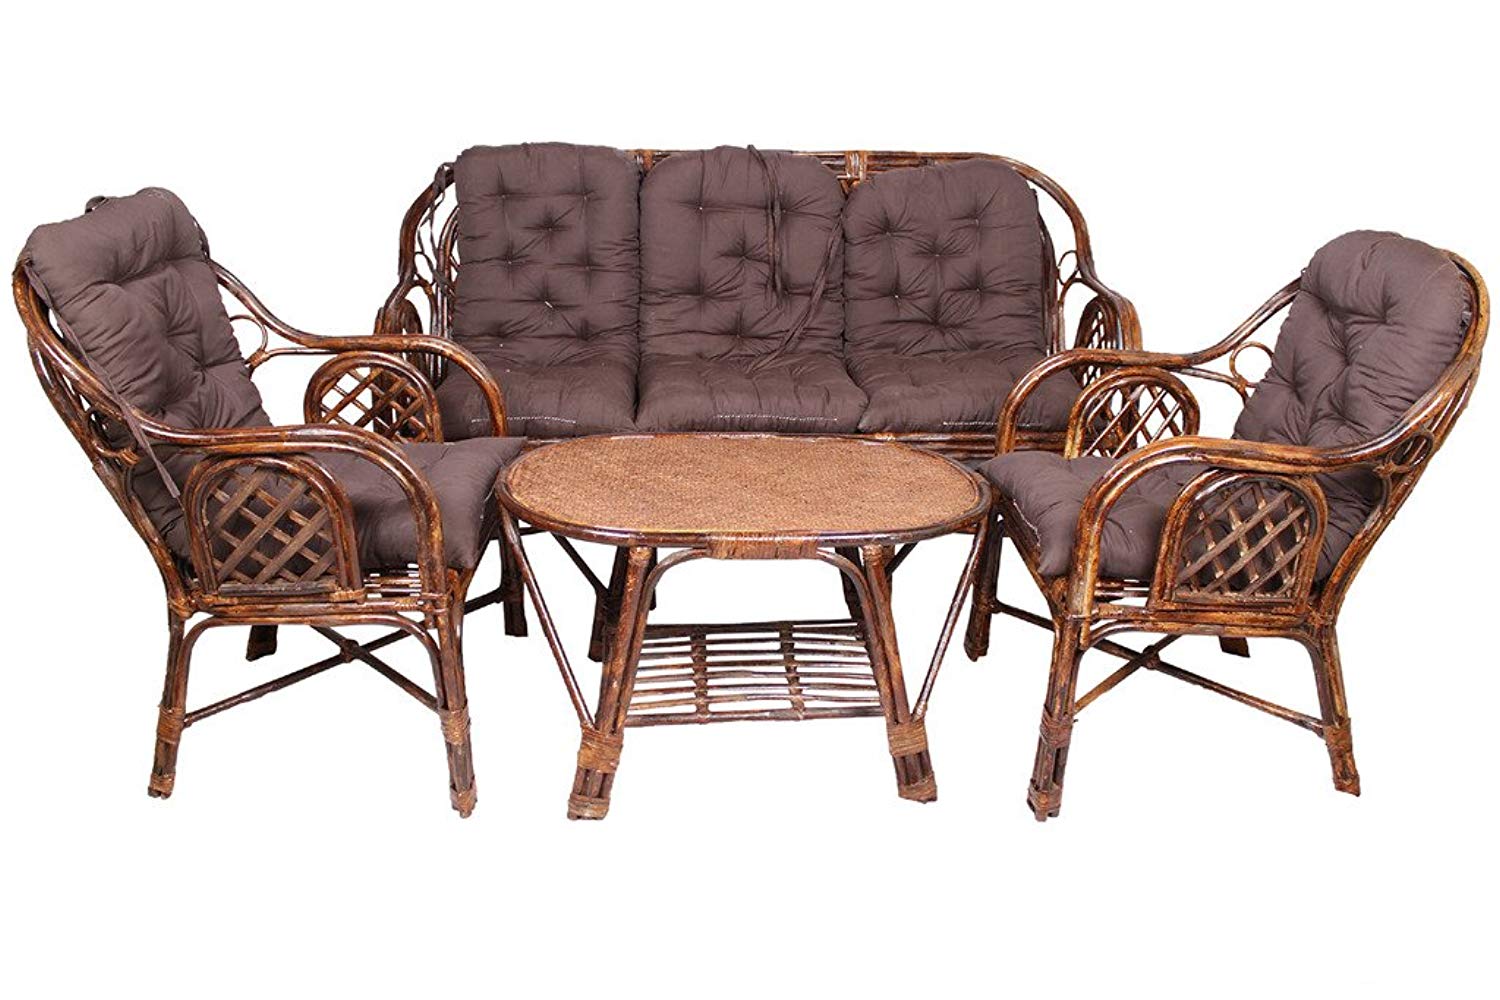 IRA Living Room 5 Seater Rattan Modern Cage Style Sofa Set with Table and Cushion - IRA Furniture